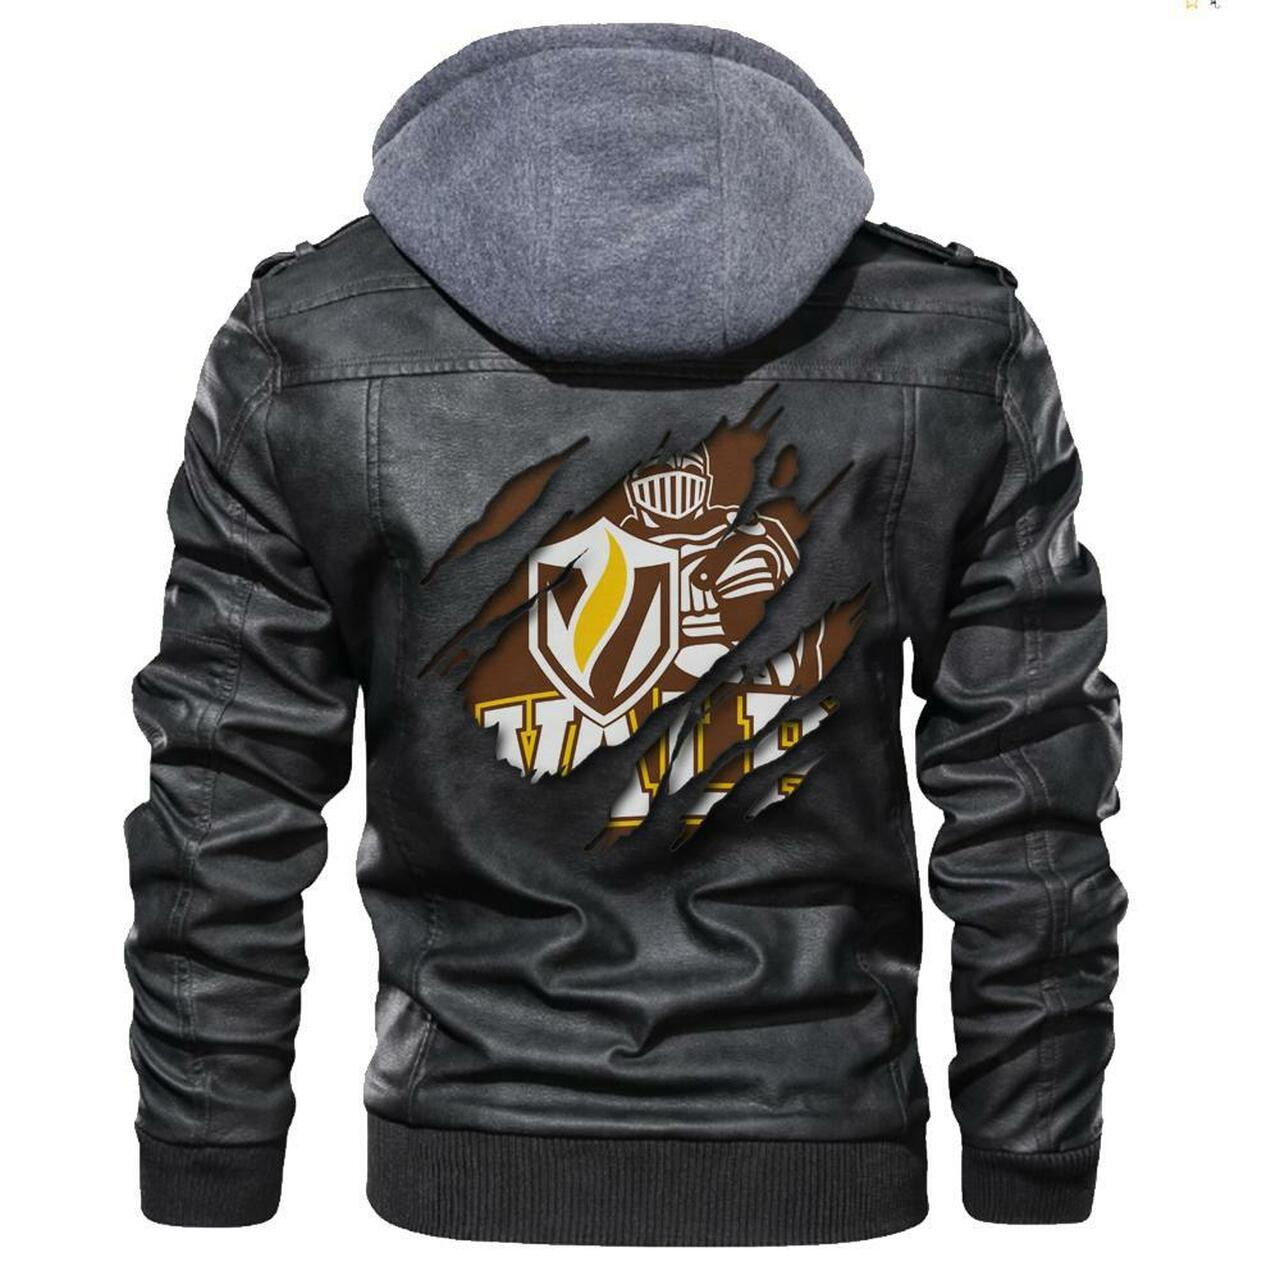 Are you looking for a great leather jacket? 203